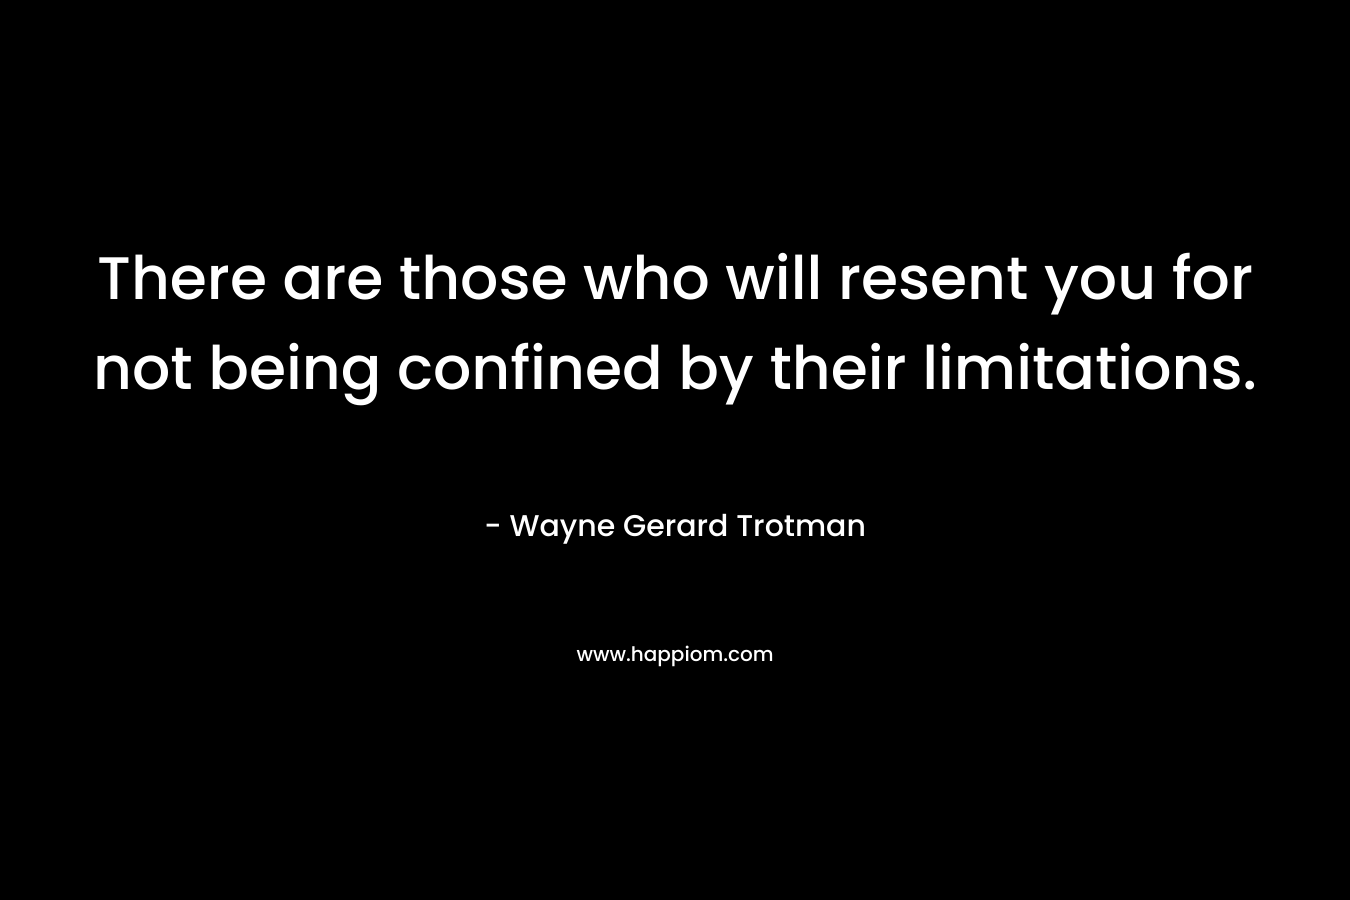 There are those who will resent you for not being confined by their limitations.